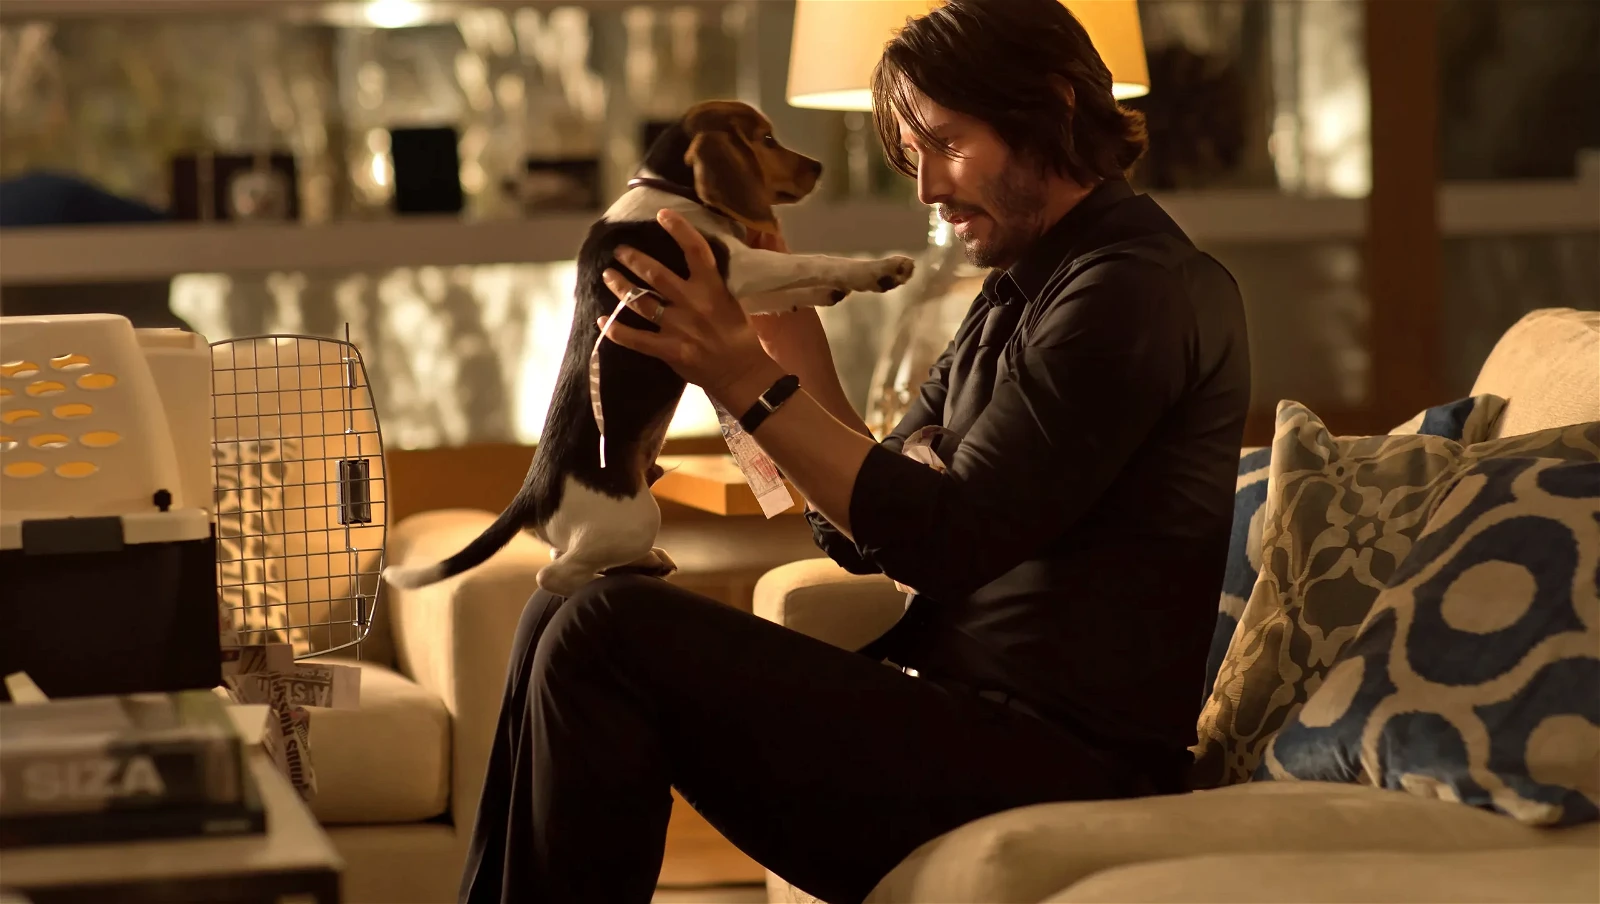 Keanu Reeves with the famous Beagle from John Wick 